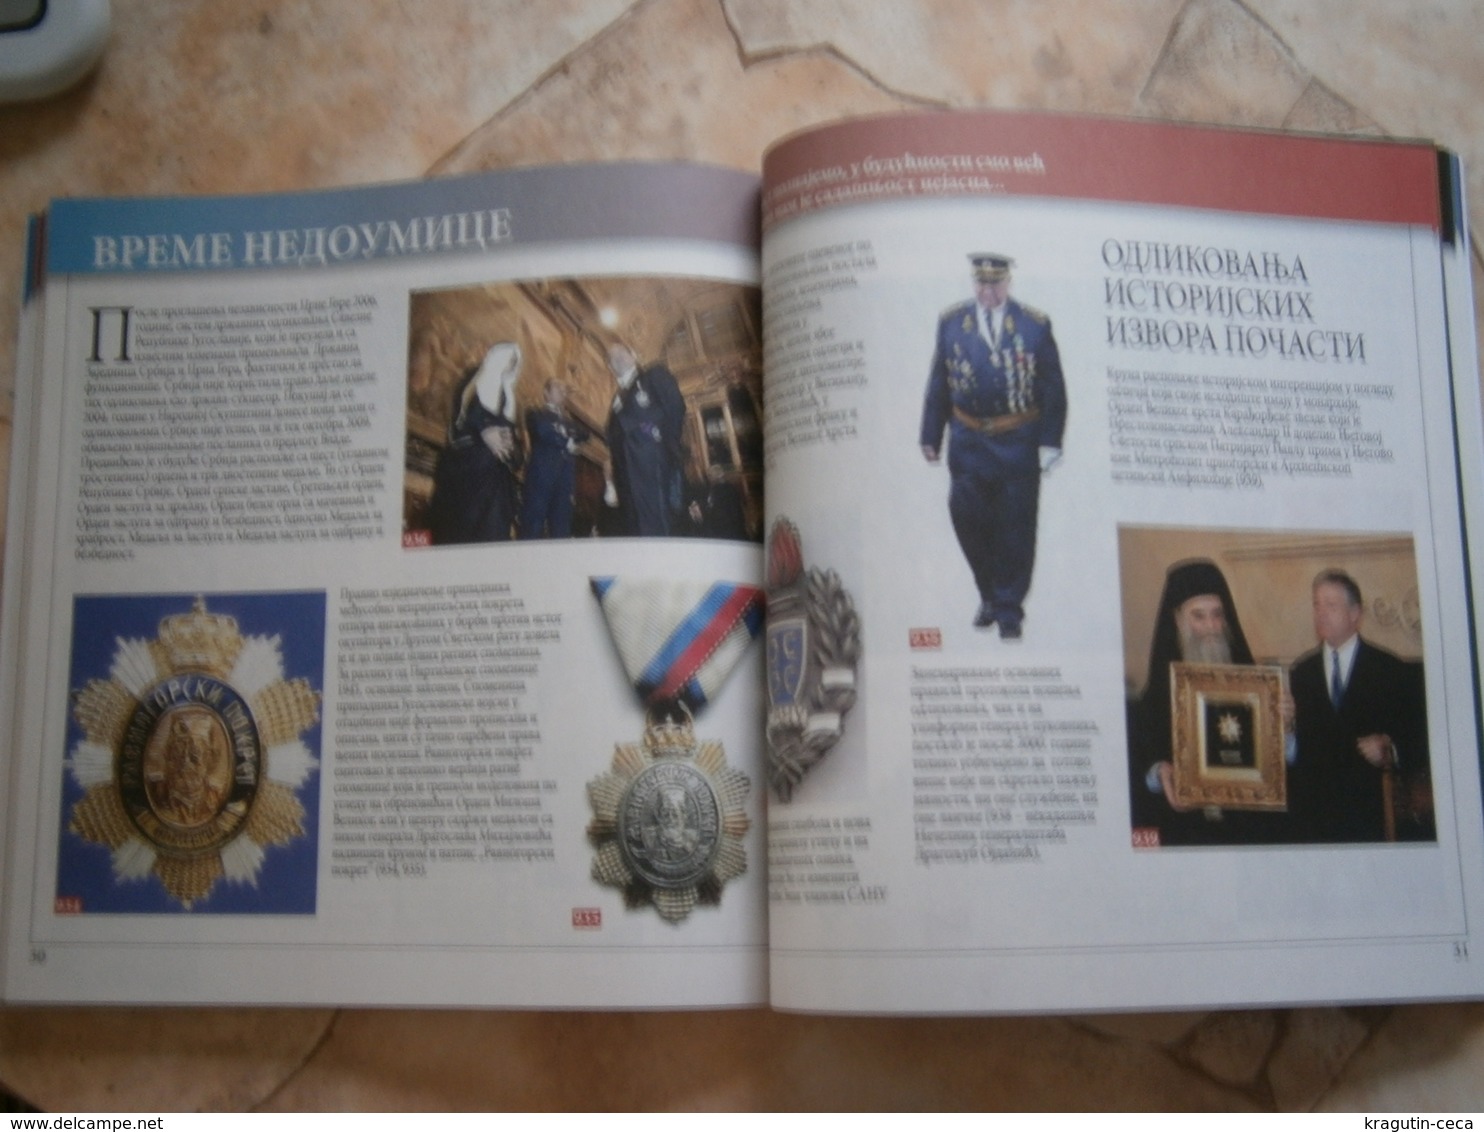 SERBIA ARMY MILITARY ROYAL DECORATIONS MEDAL ORDER BOOK DEKORATIONEN MEDAILLE BUCH RED CROSS Obilic Sv Sava White Eagle